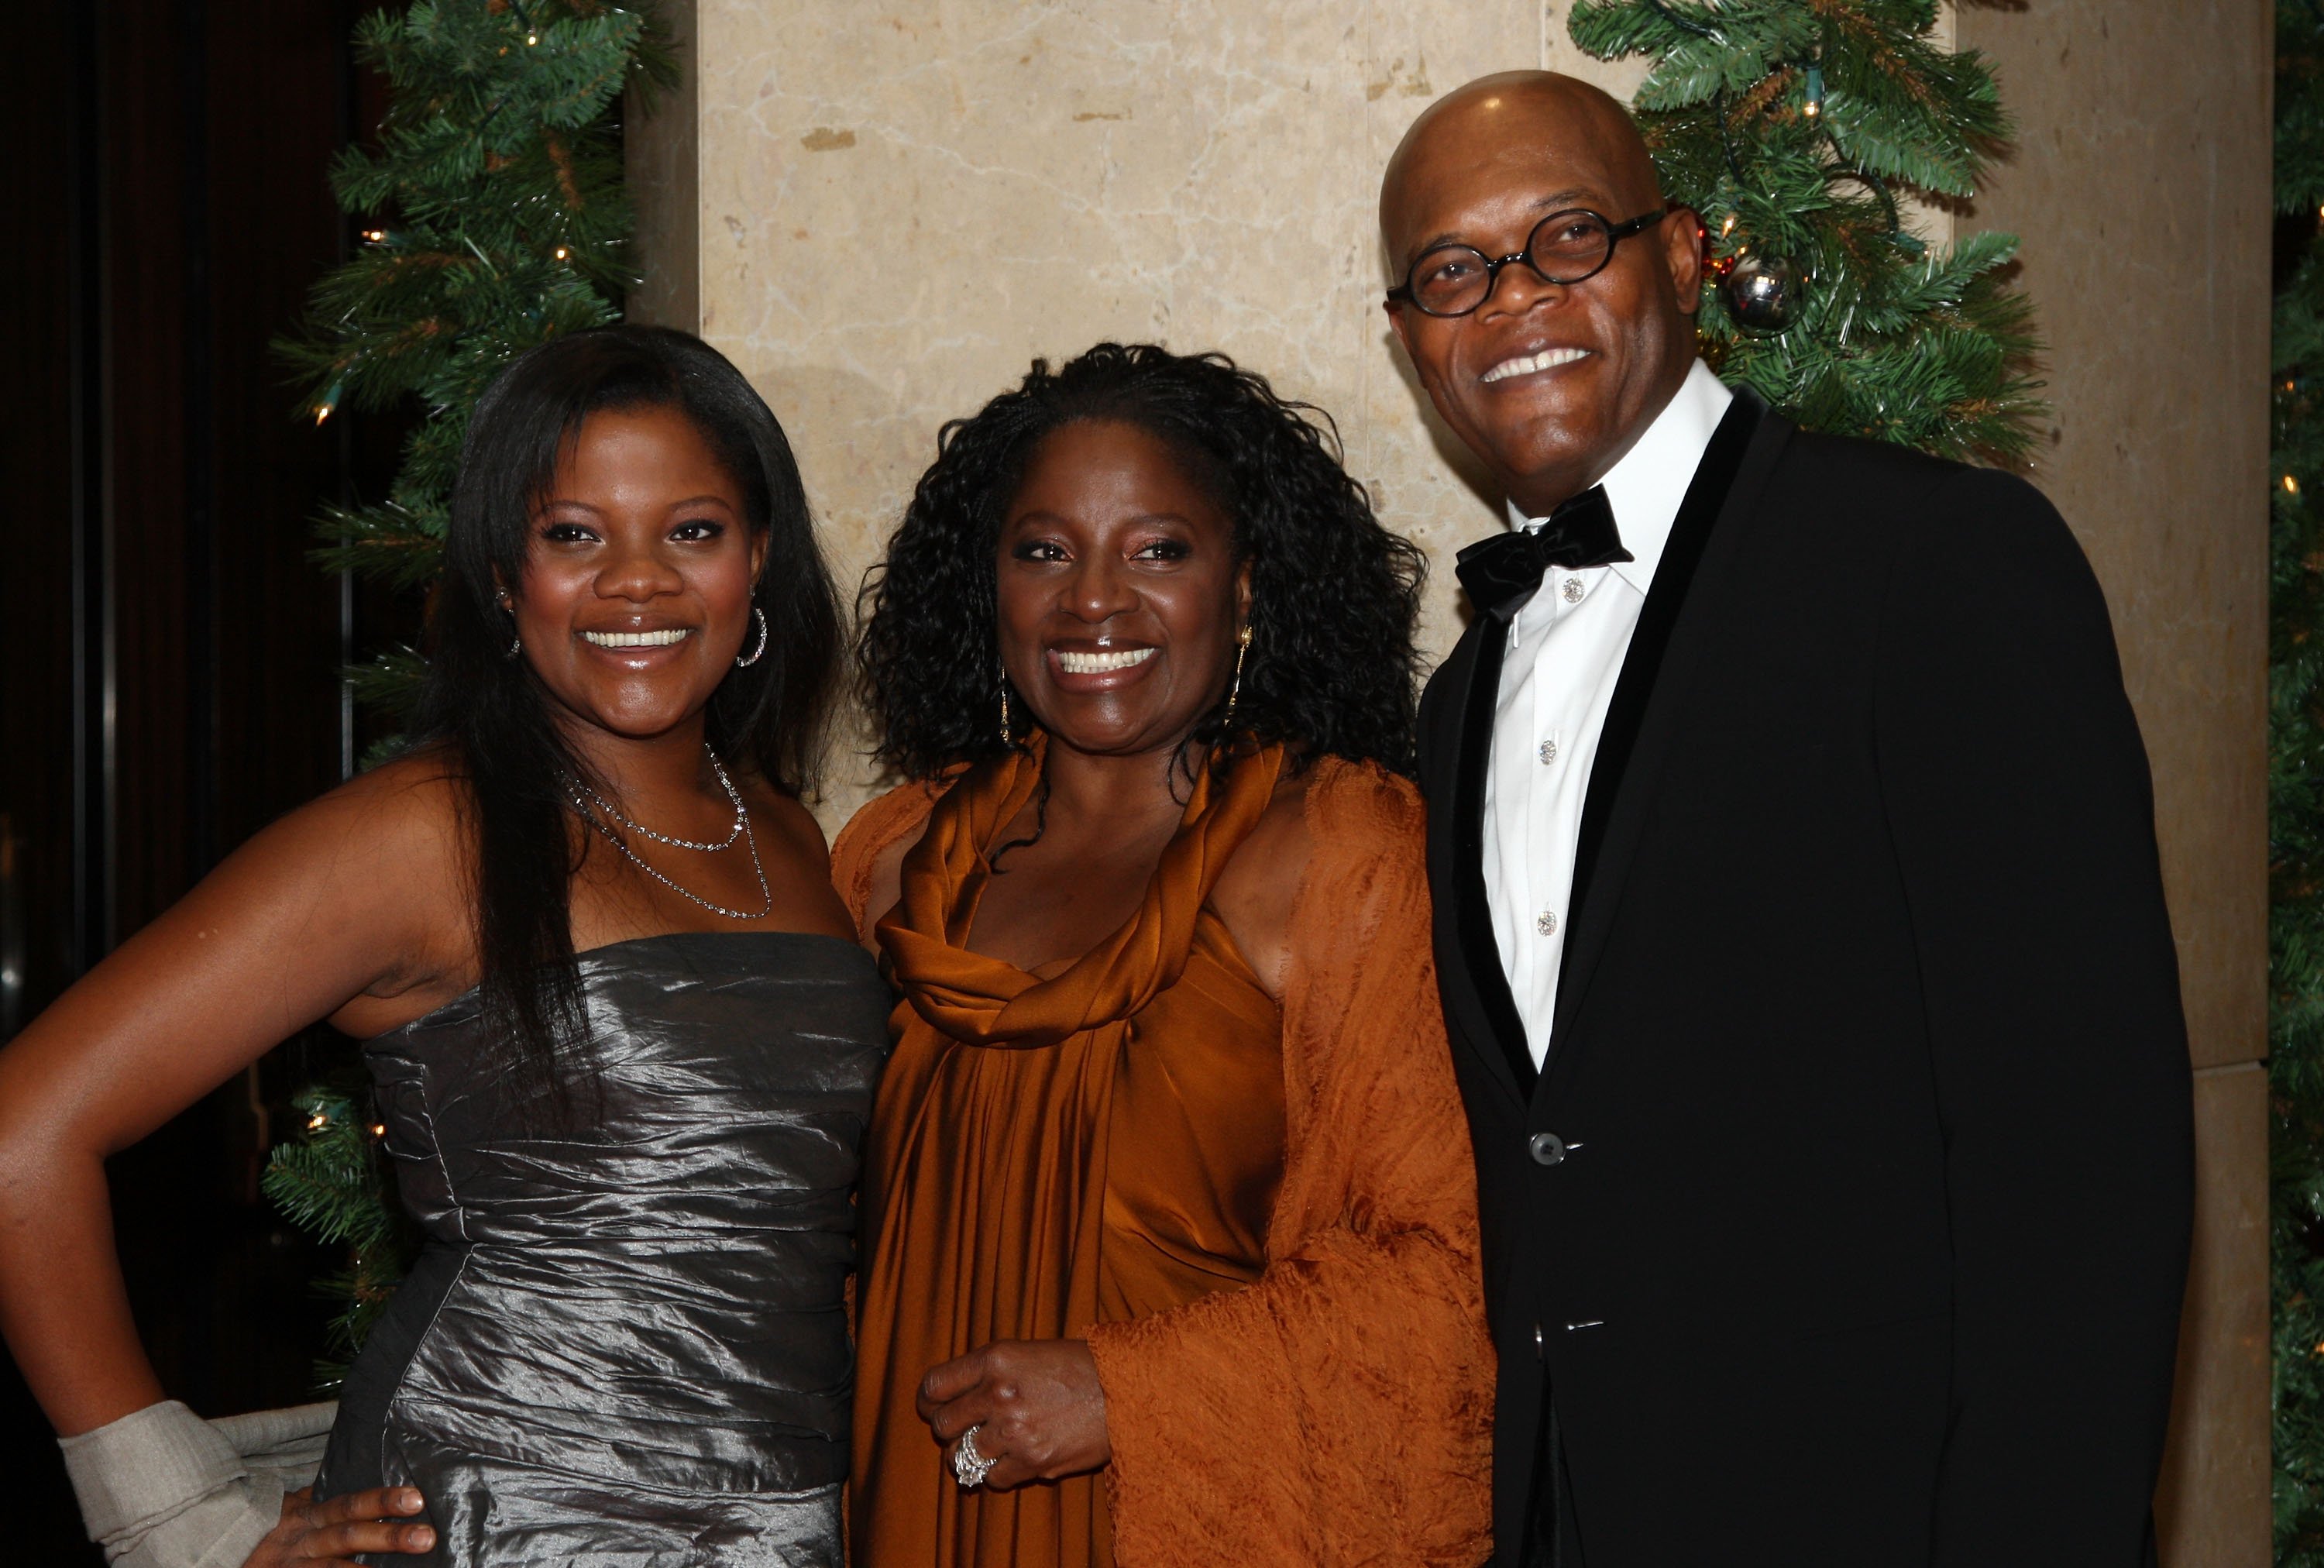 Samuel L. Jackson, LaTanya Richardson, and Zoe Jackson arrive at the 23rd annual American Cinematheque show on December 1, 2008. | Photo: Getty Images